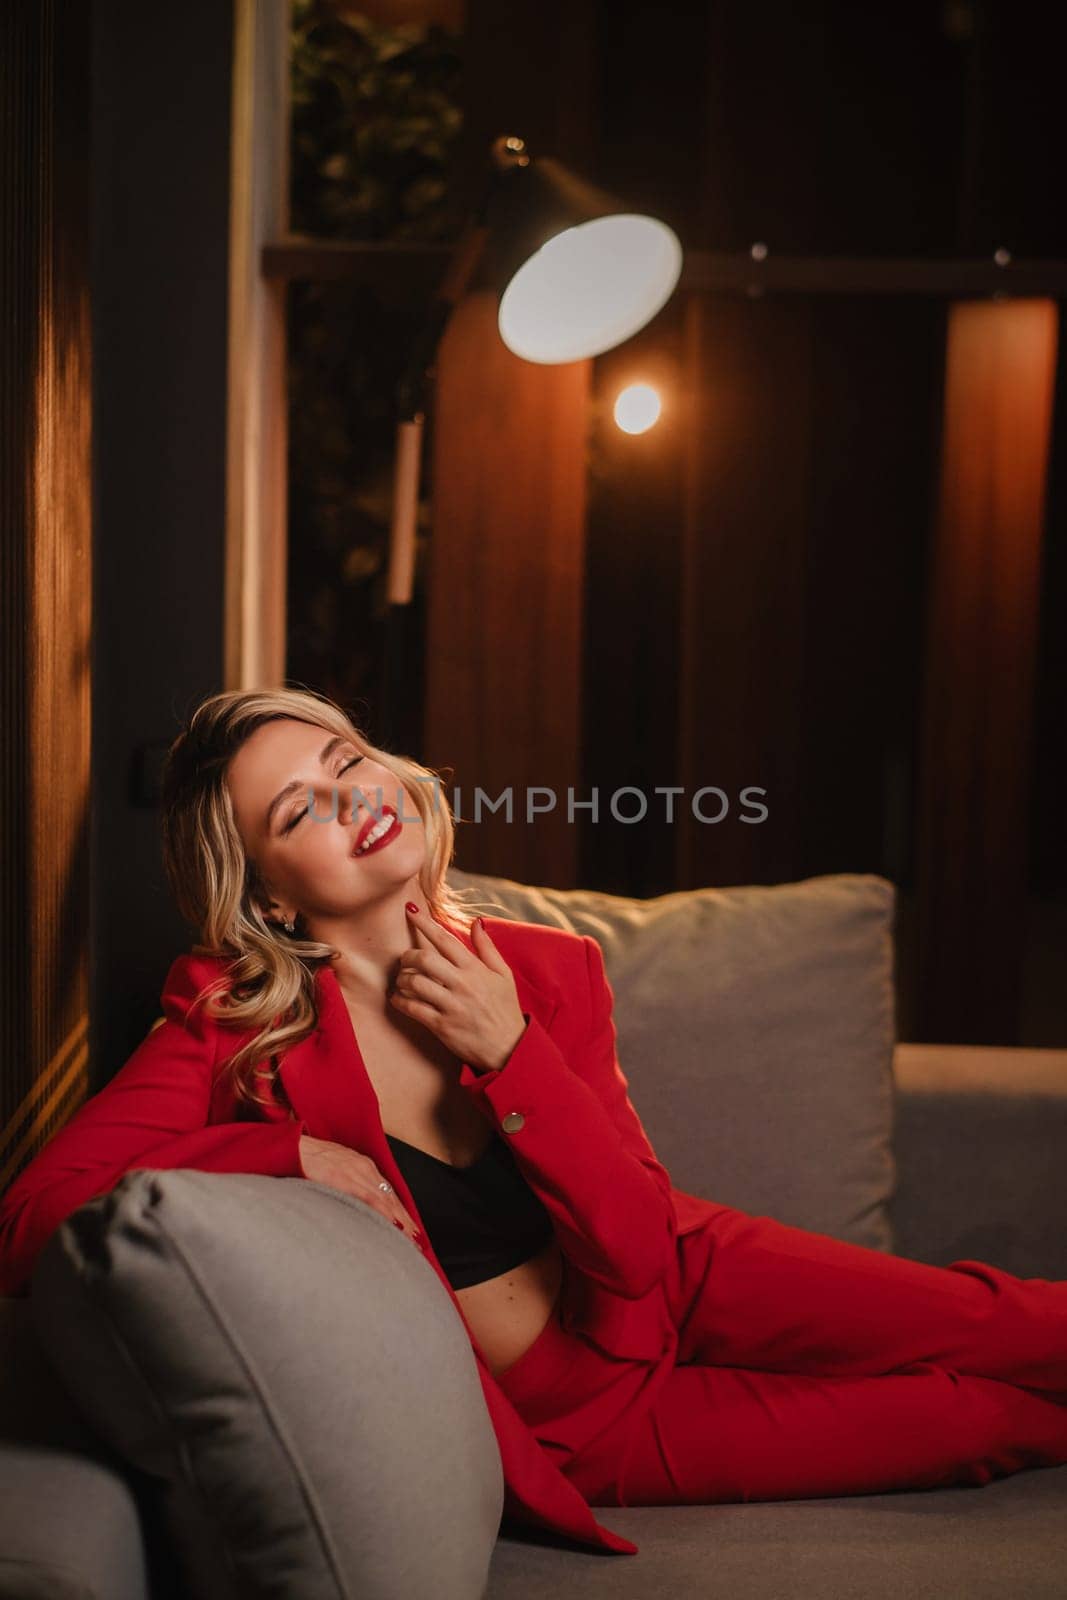 a beautiful girl dressed in a red formal suit posing in a modern interior by Lobachad